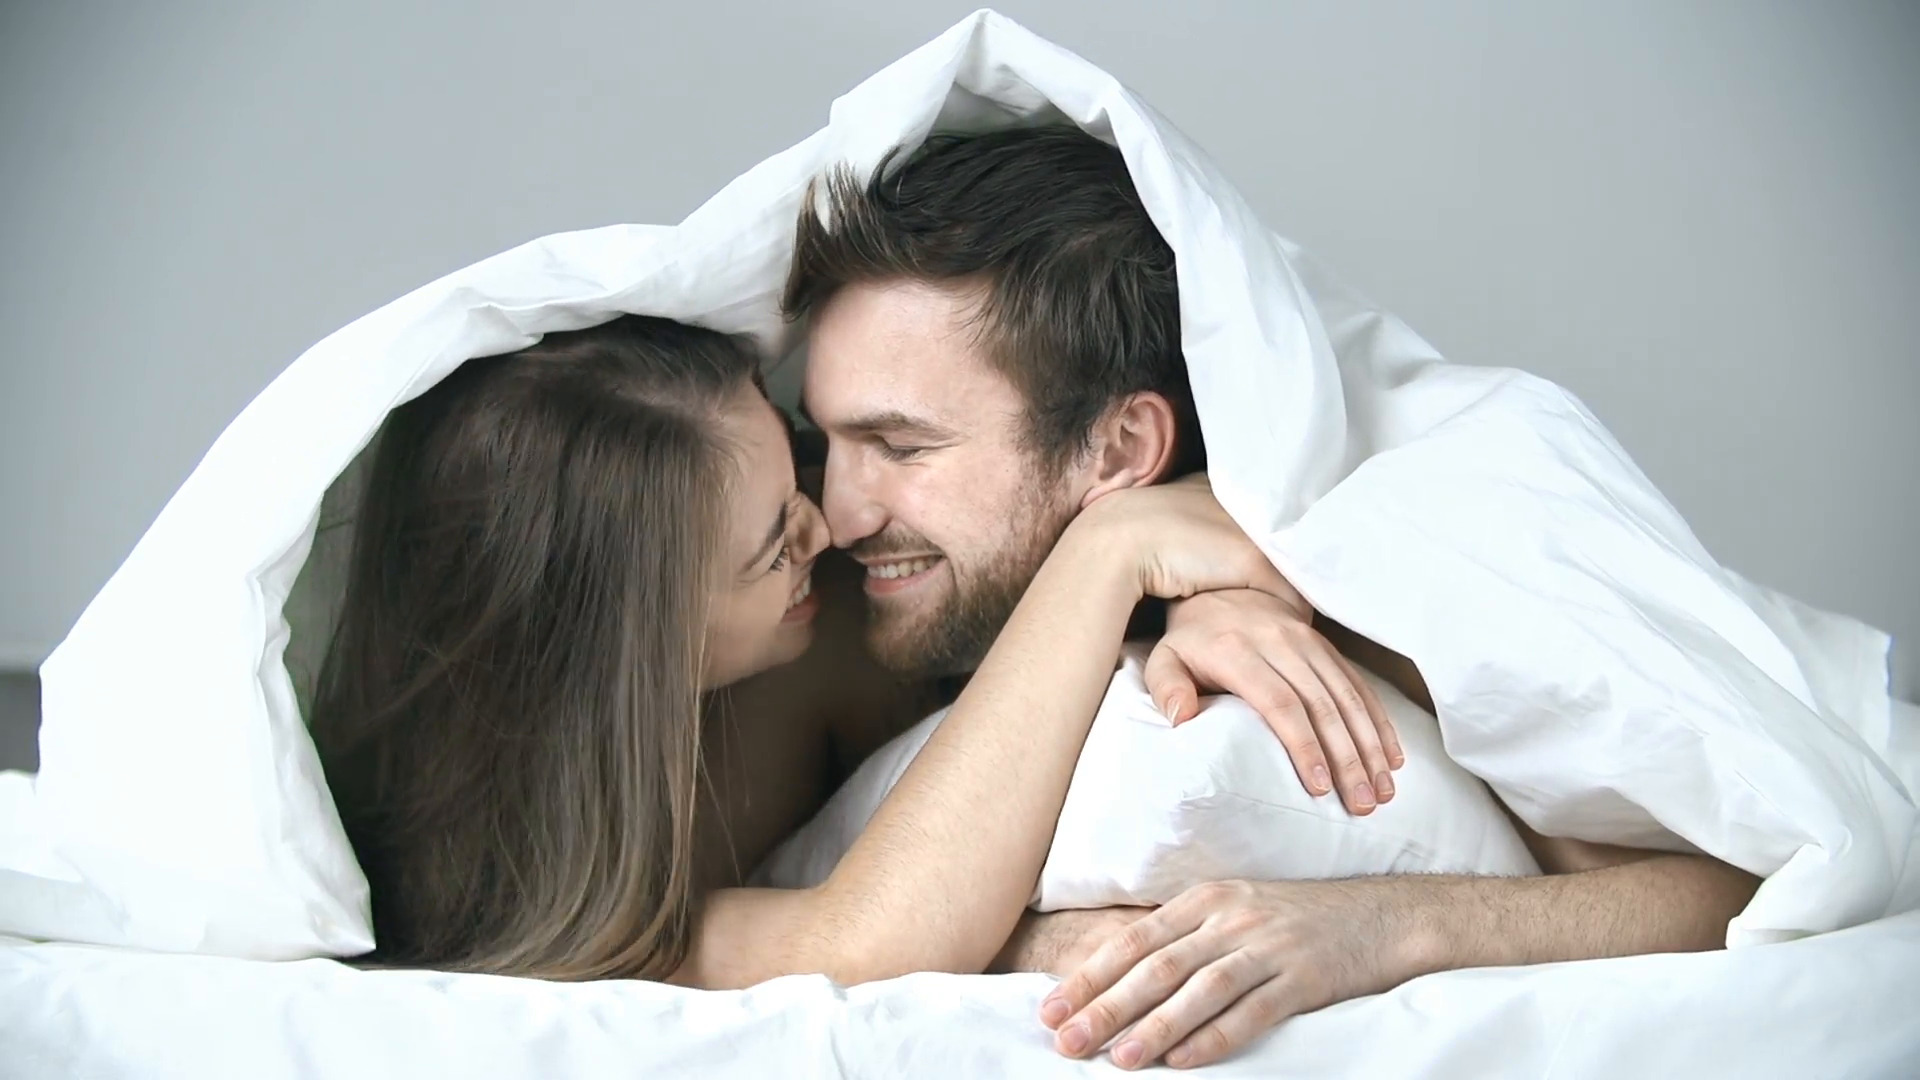 Married Hookup Apps Fever — Why Is Everyone Obsessed With Them?